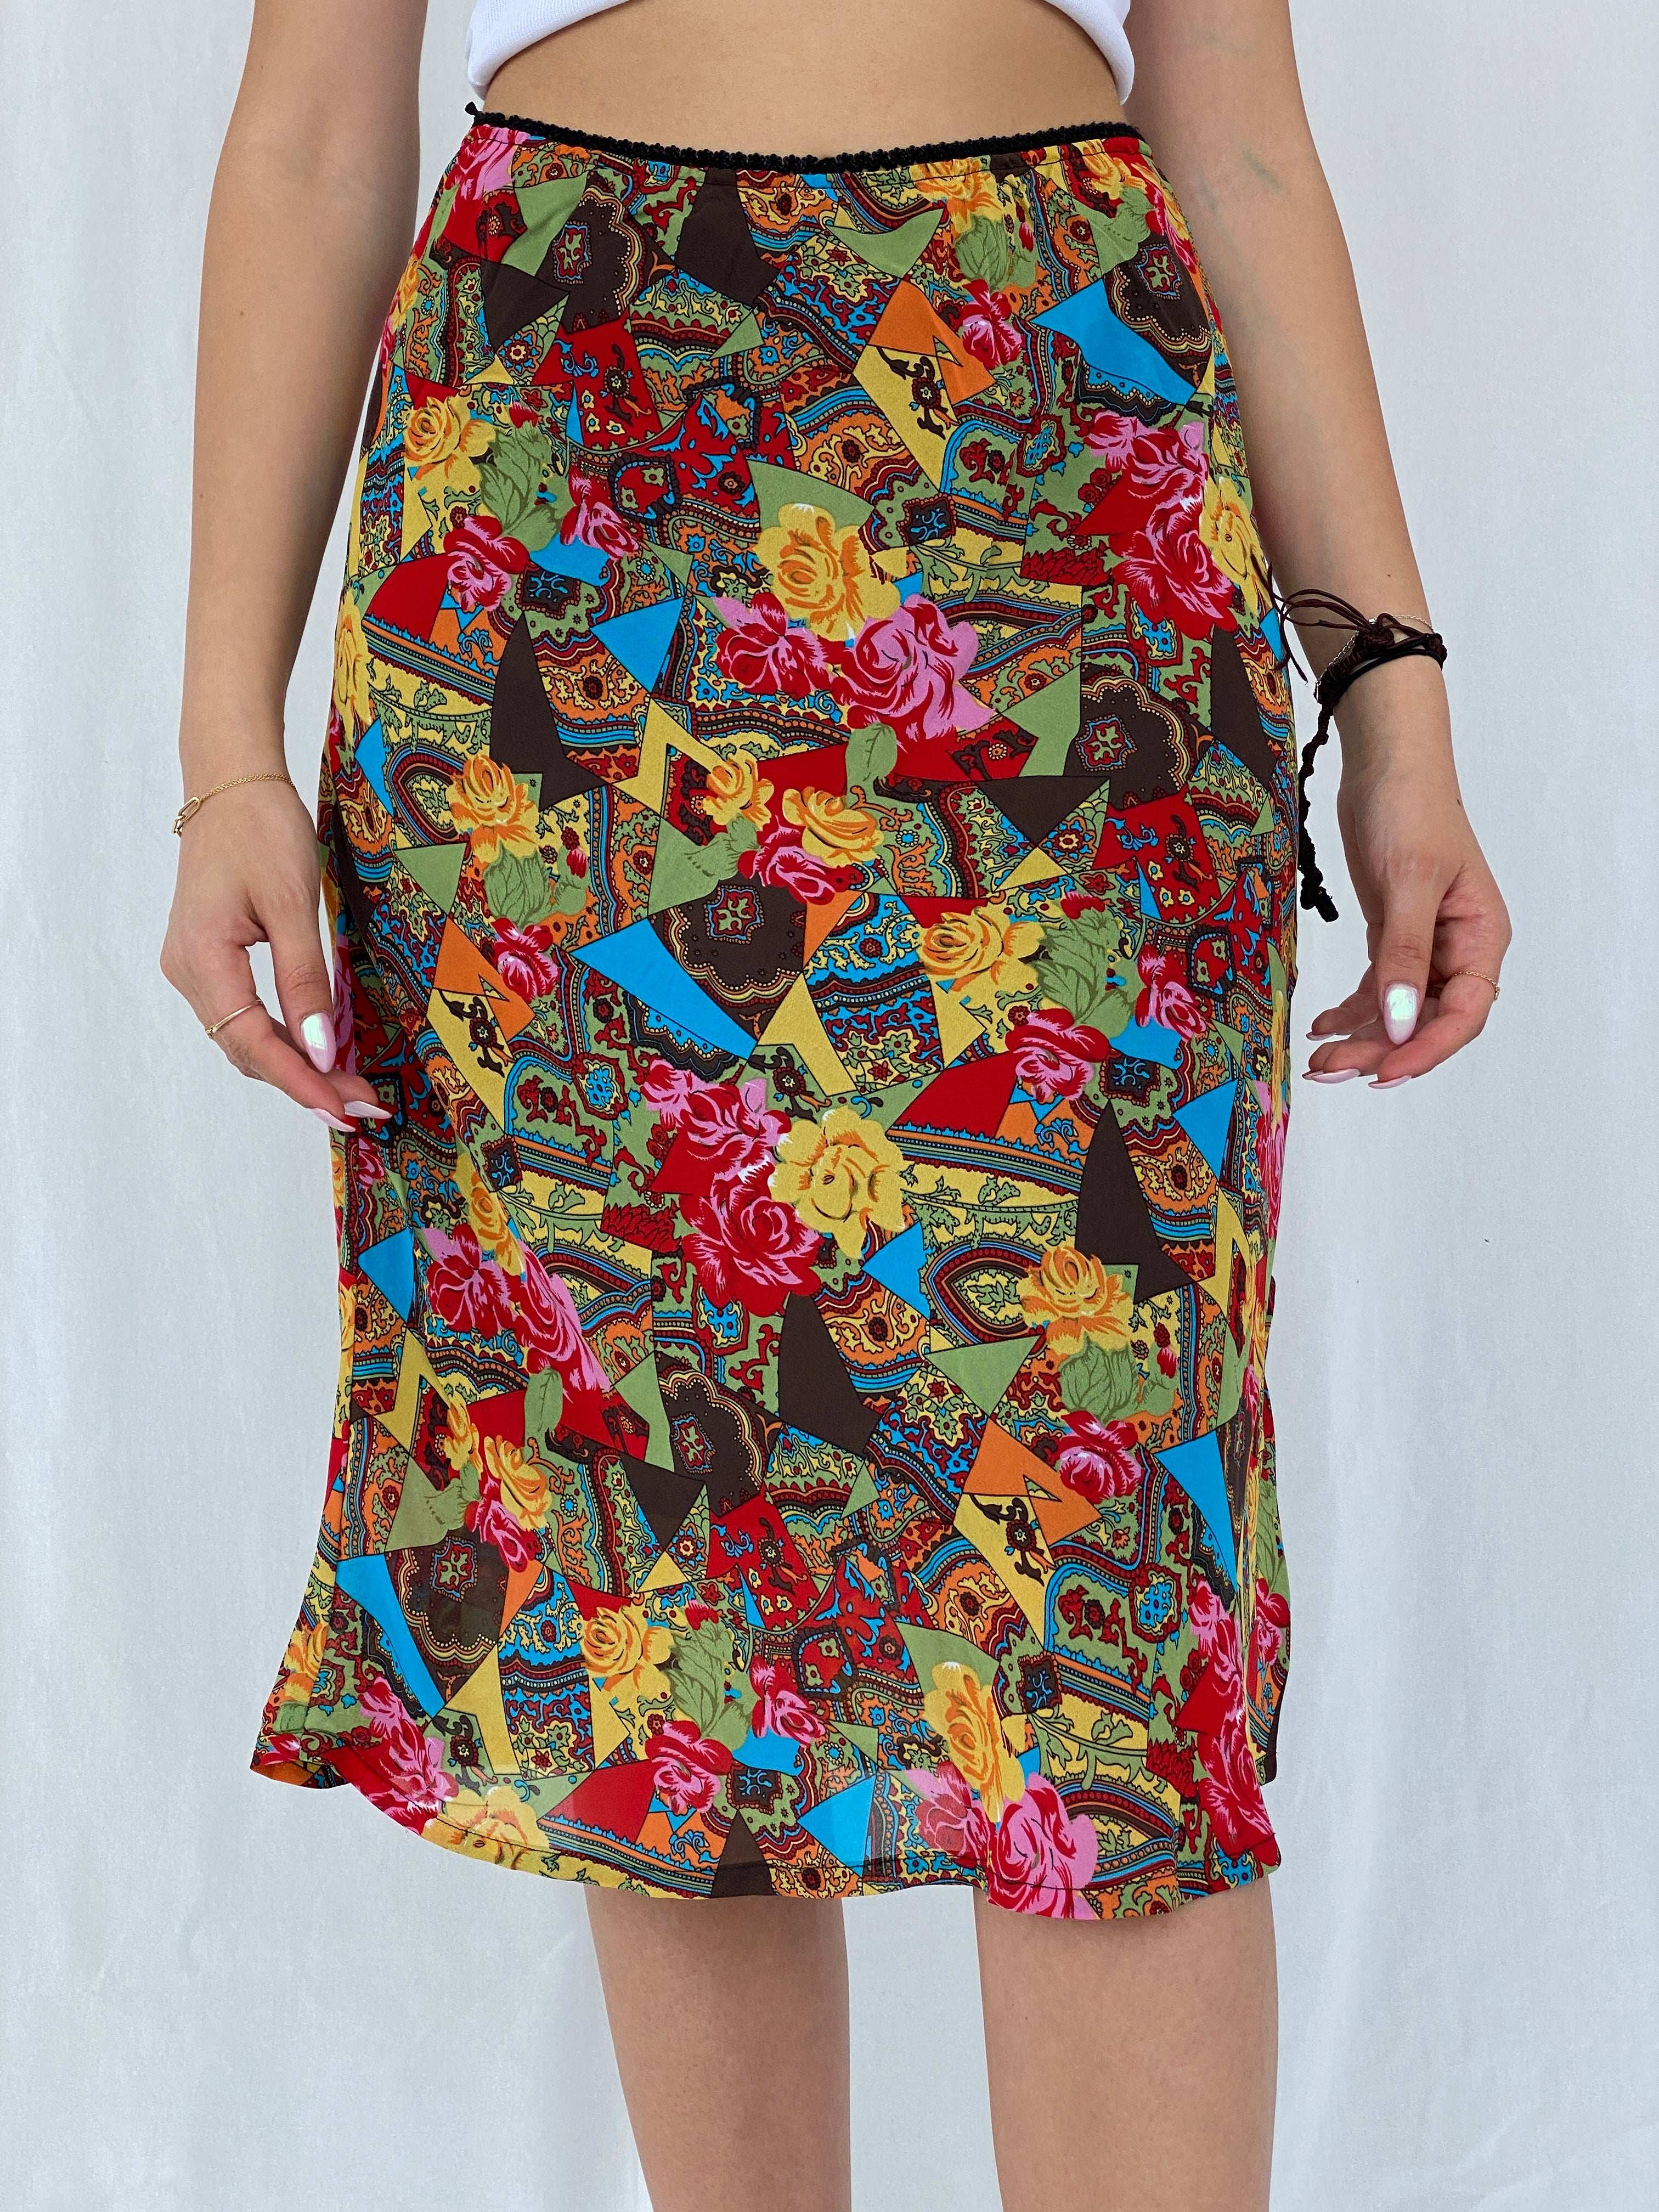 Stunning Vintage 90s Outfit Colorful Floral Midi Skirt Size L - Balagan Vintage Midi Skirt 90s, floral, floral skirt, Juana, midi skirt, NEW IN, women skirt